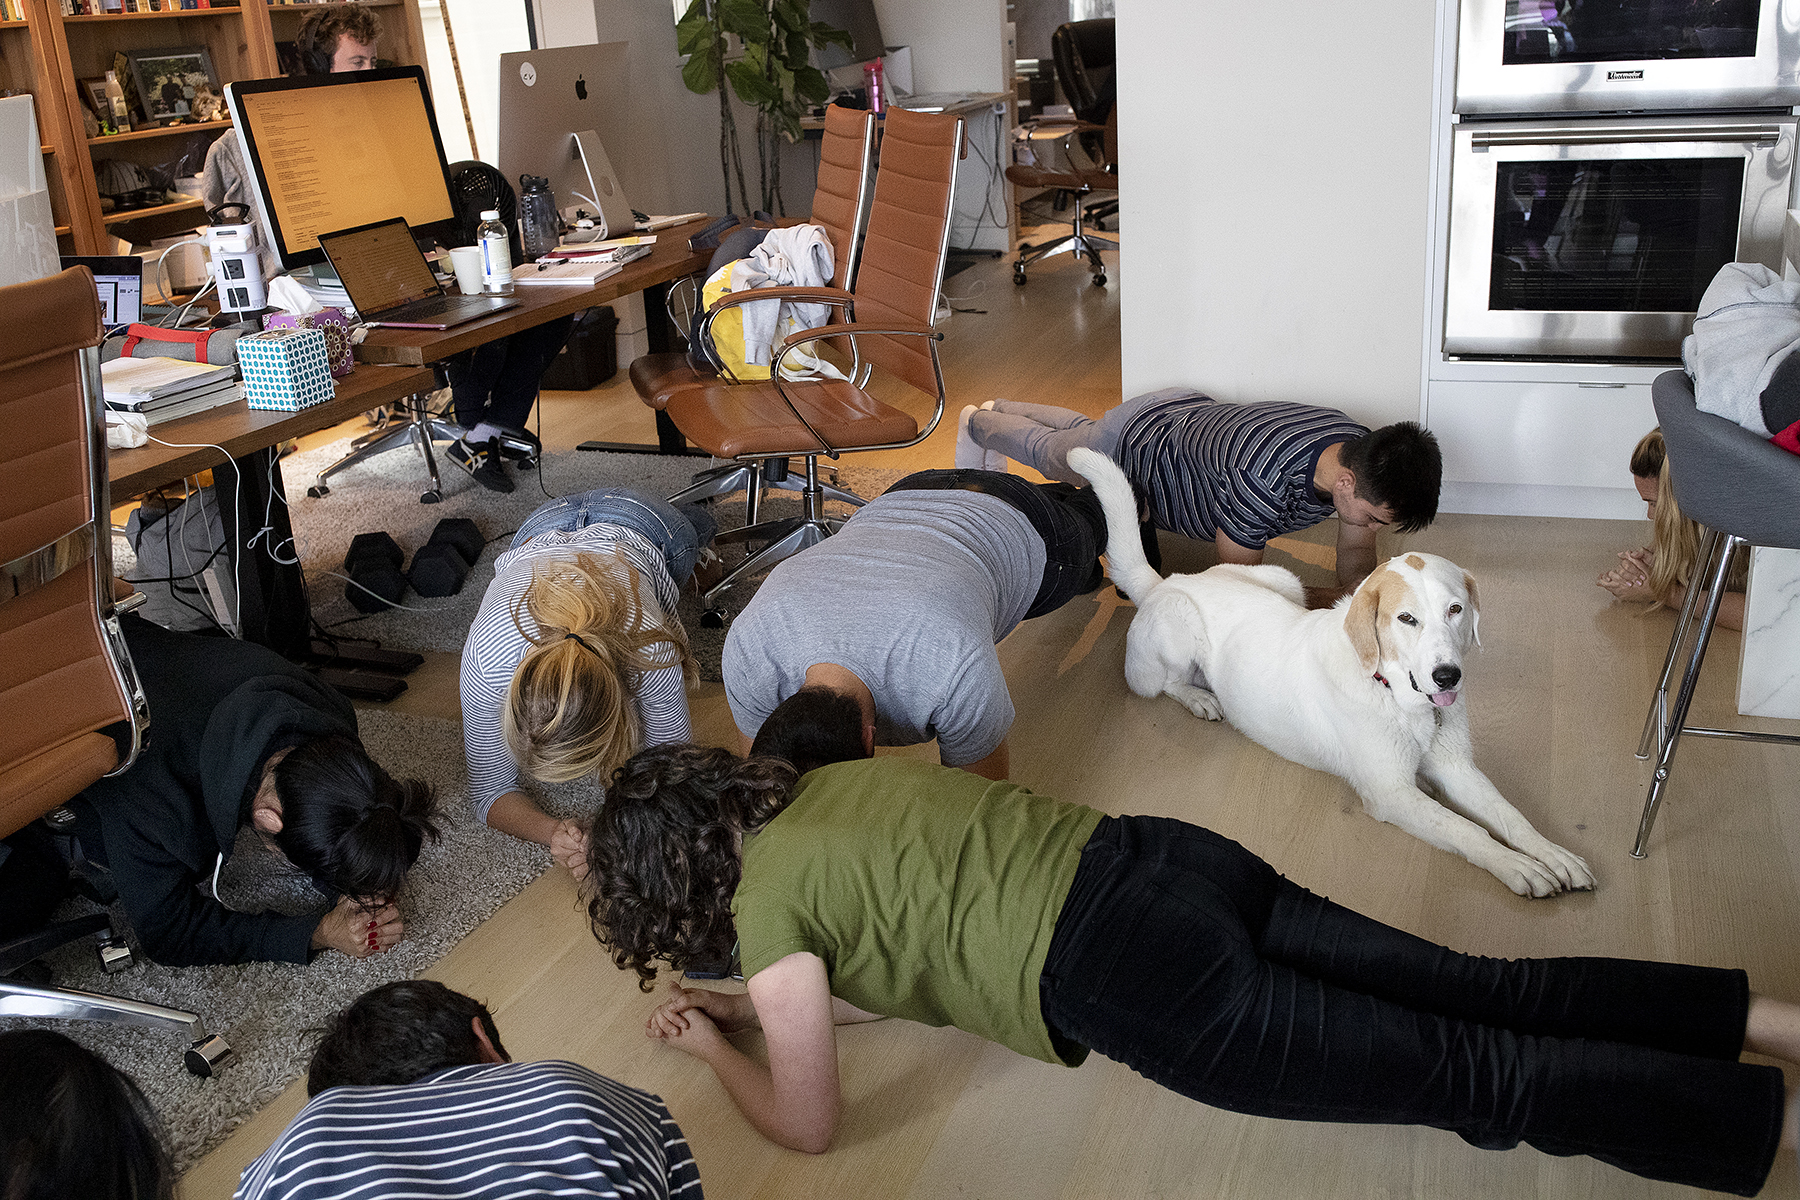 Employees of Wefunder gather for an afternoon planking break and are joined by Bucket, a team member’s dog, at the company’s San Francisco office, a house that is home to the CEO and some employees in San Francisco, Calif., on August 13, 2018. The start-up successfully lobbied Congress to legalize equity crowdfunding, allowing privately held companies to raise investment from everyday people, so-called unaccredited investors.